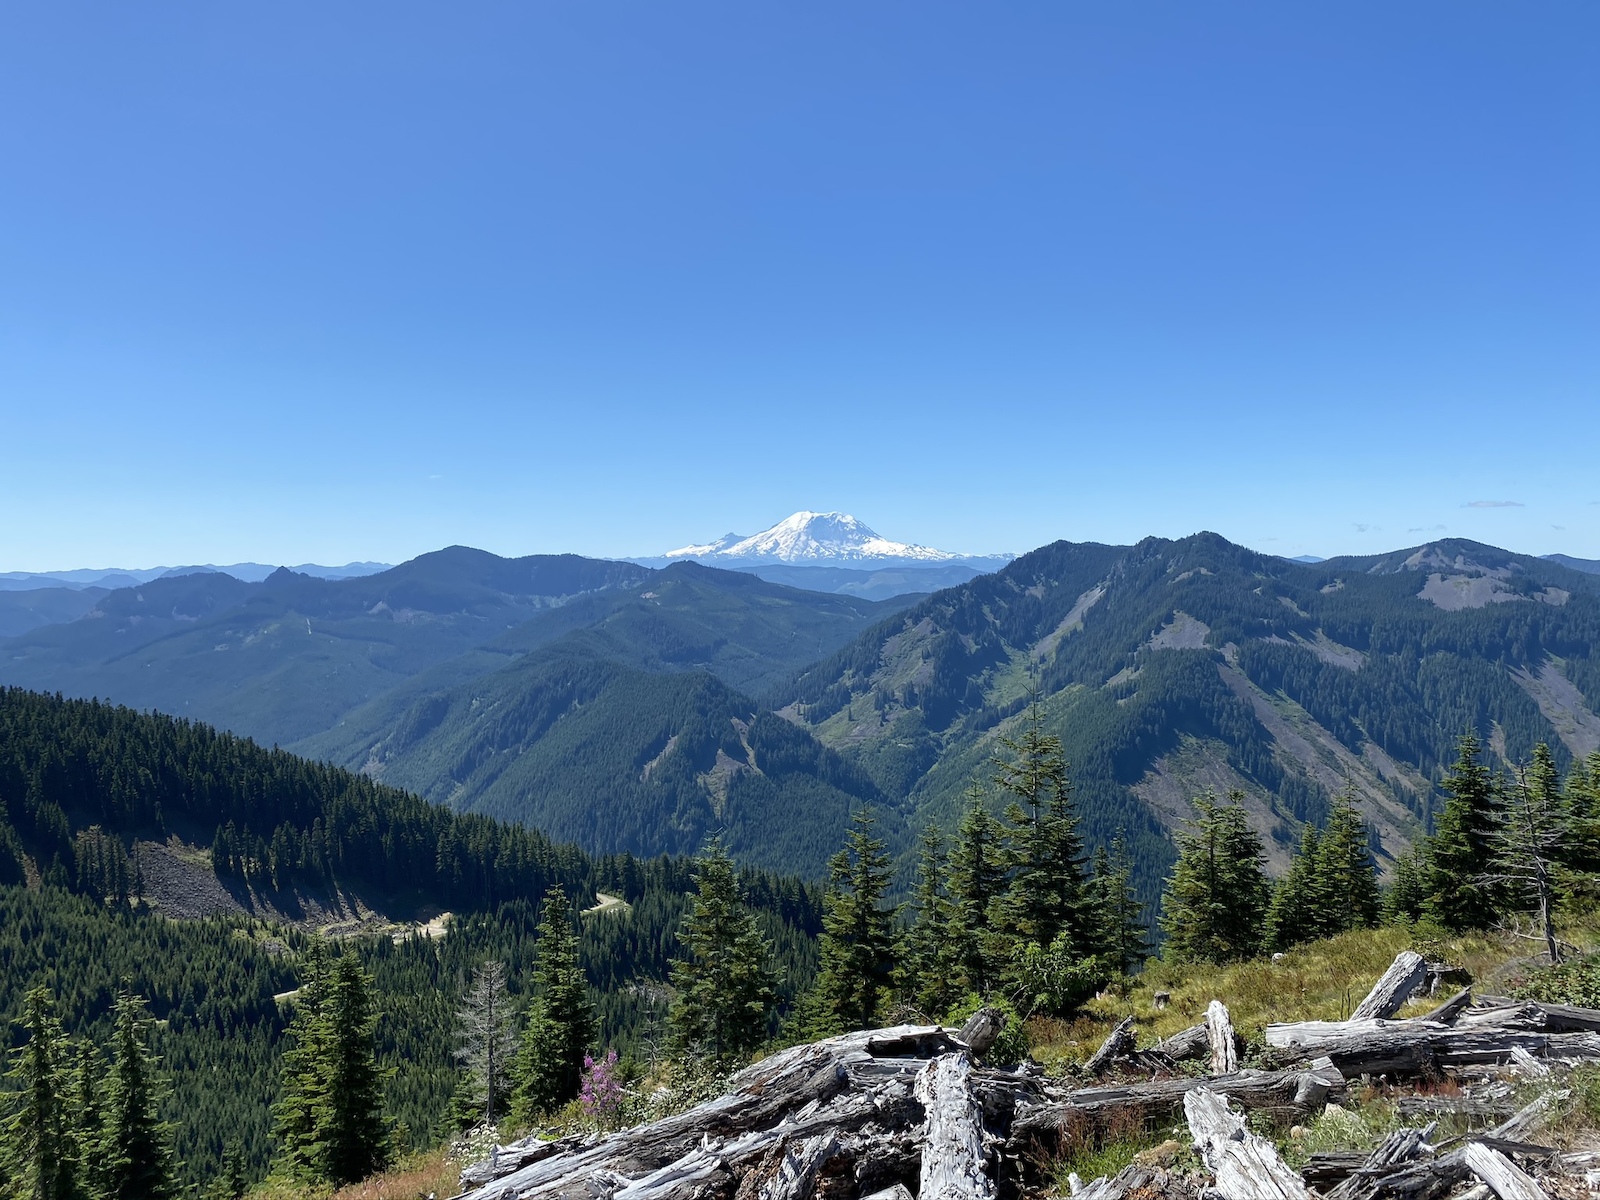 View of Mt Rainier from the viewpoint at the end of the Little Saint Helens trail (slightly below the true peak).